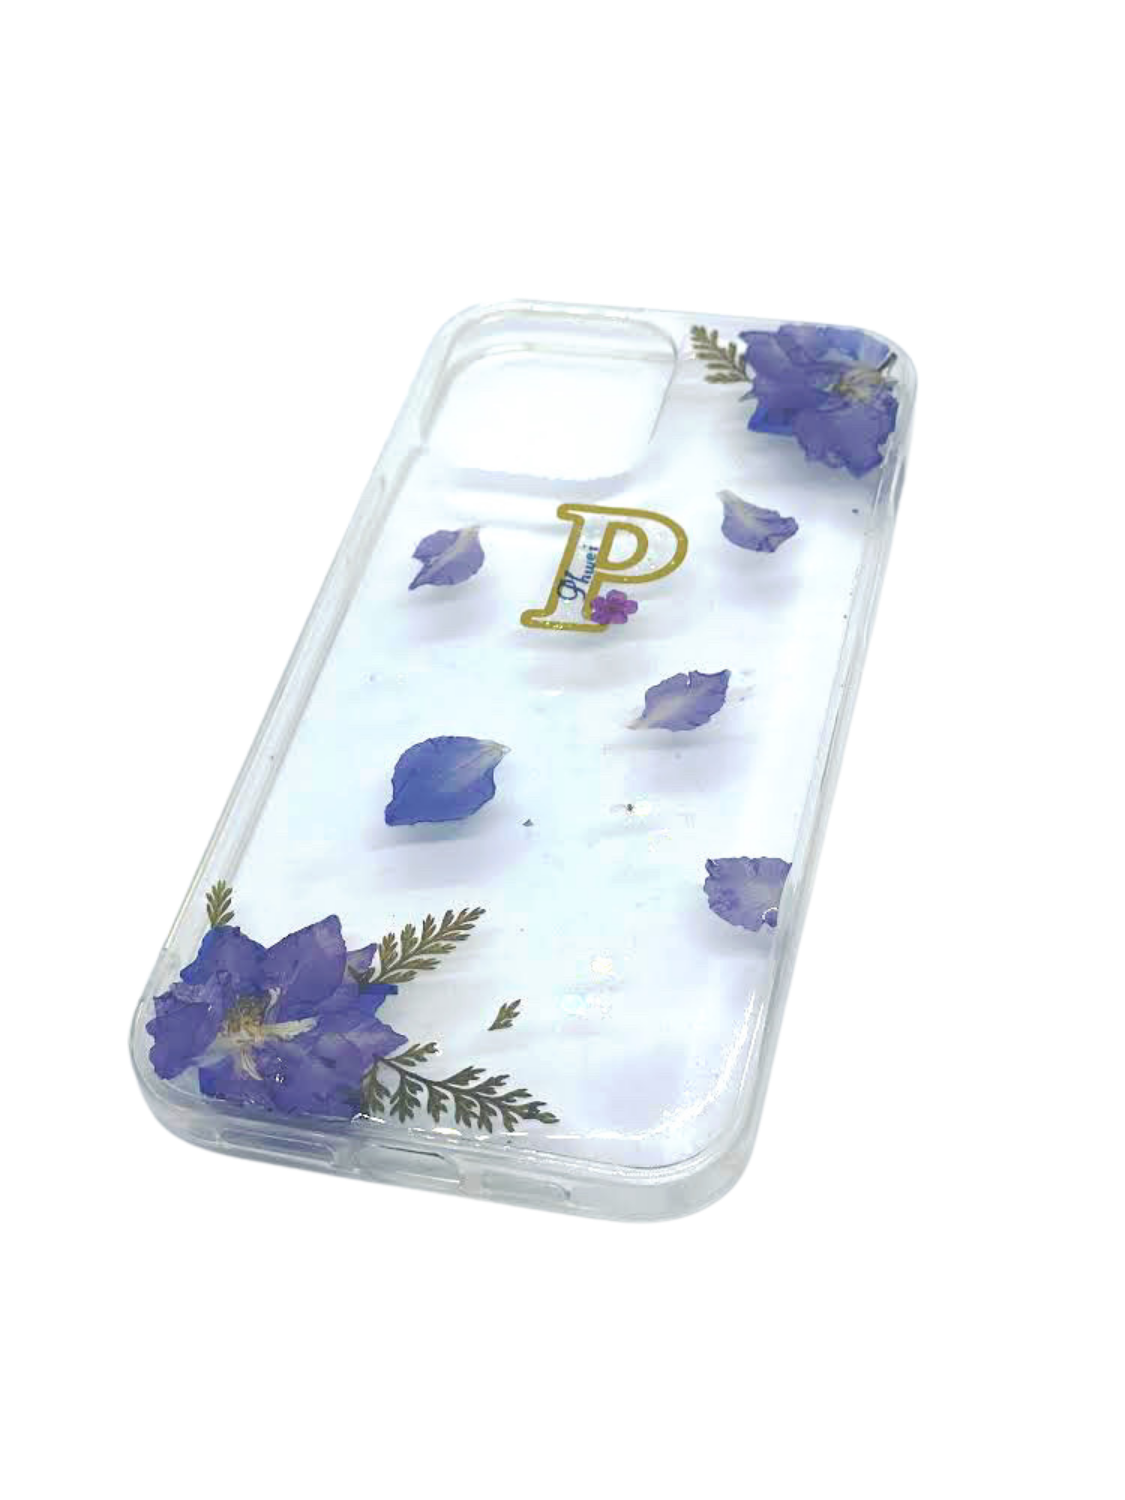 Mobile phone cover| Handmade | Nature's Art Lab